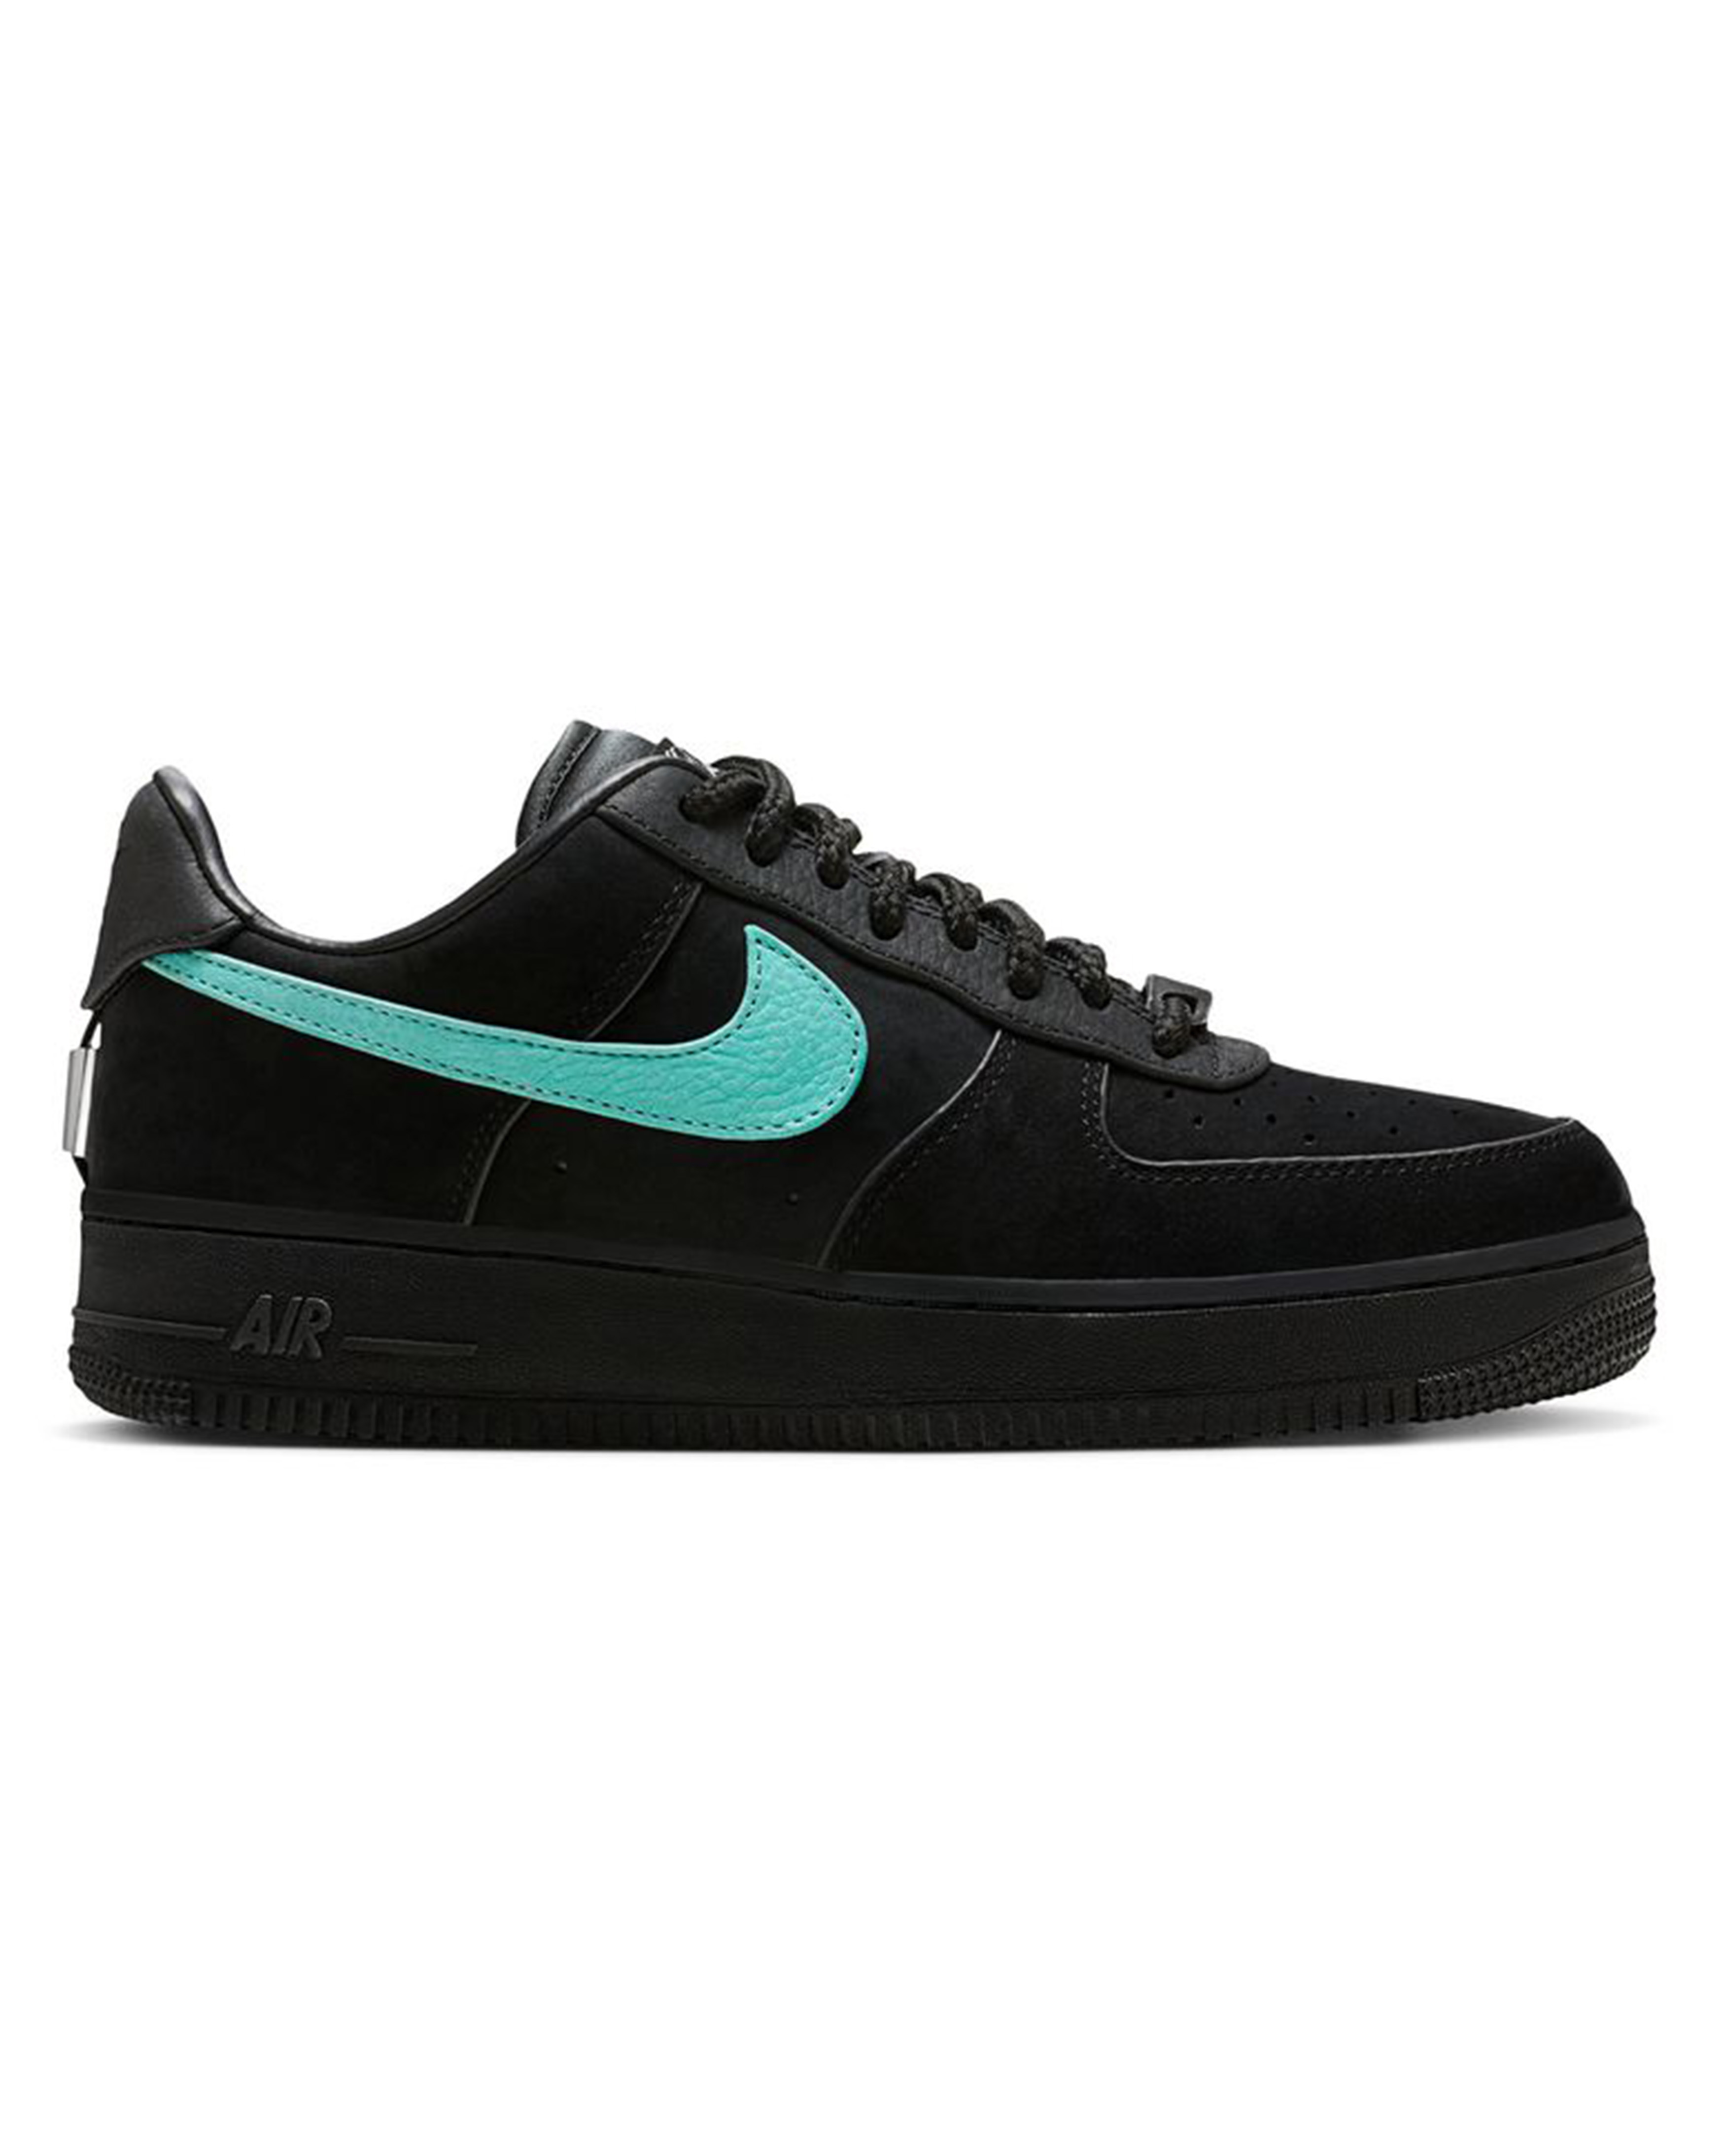 Now In Stock: Tiffany x Nike Air Force 1 - Stadium Goods